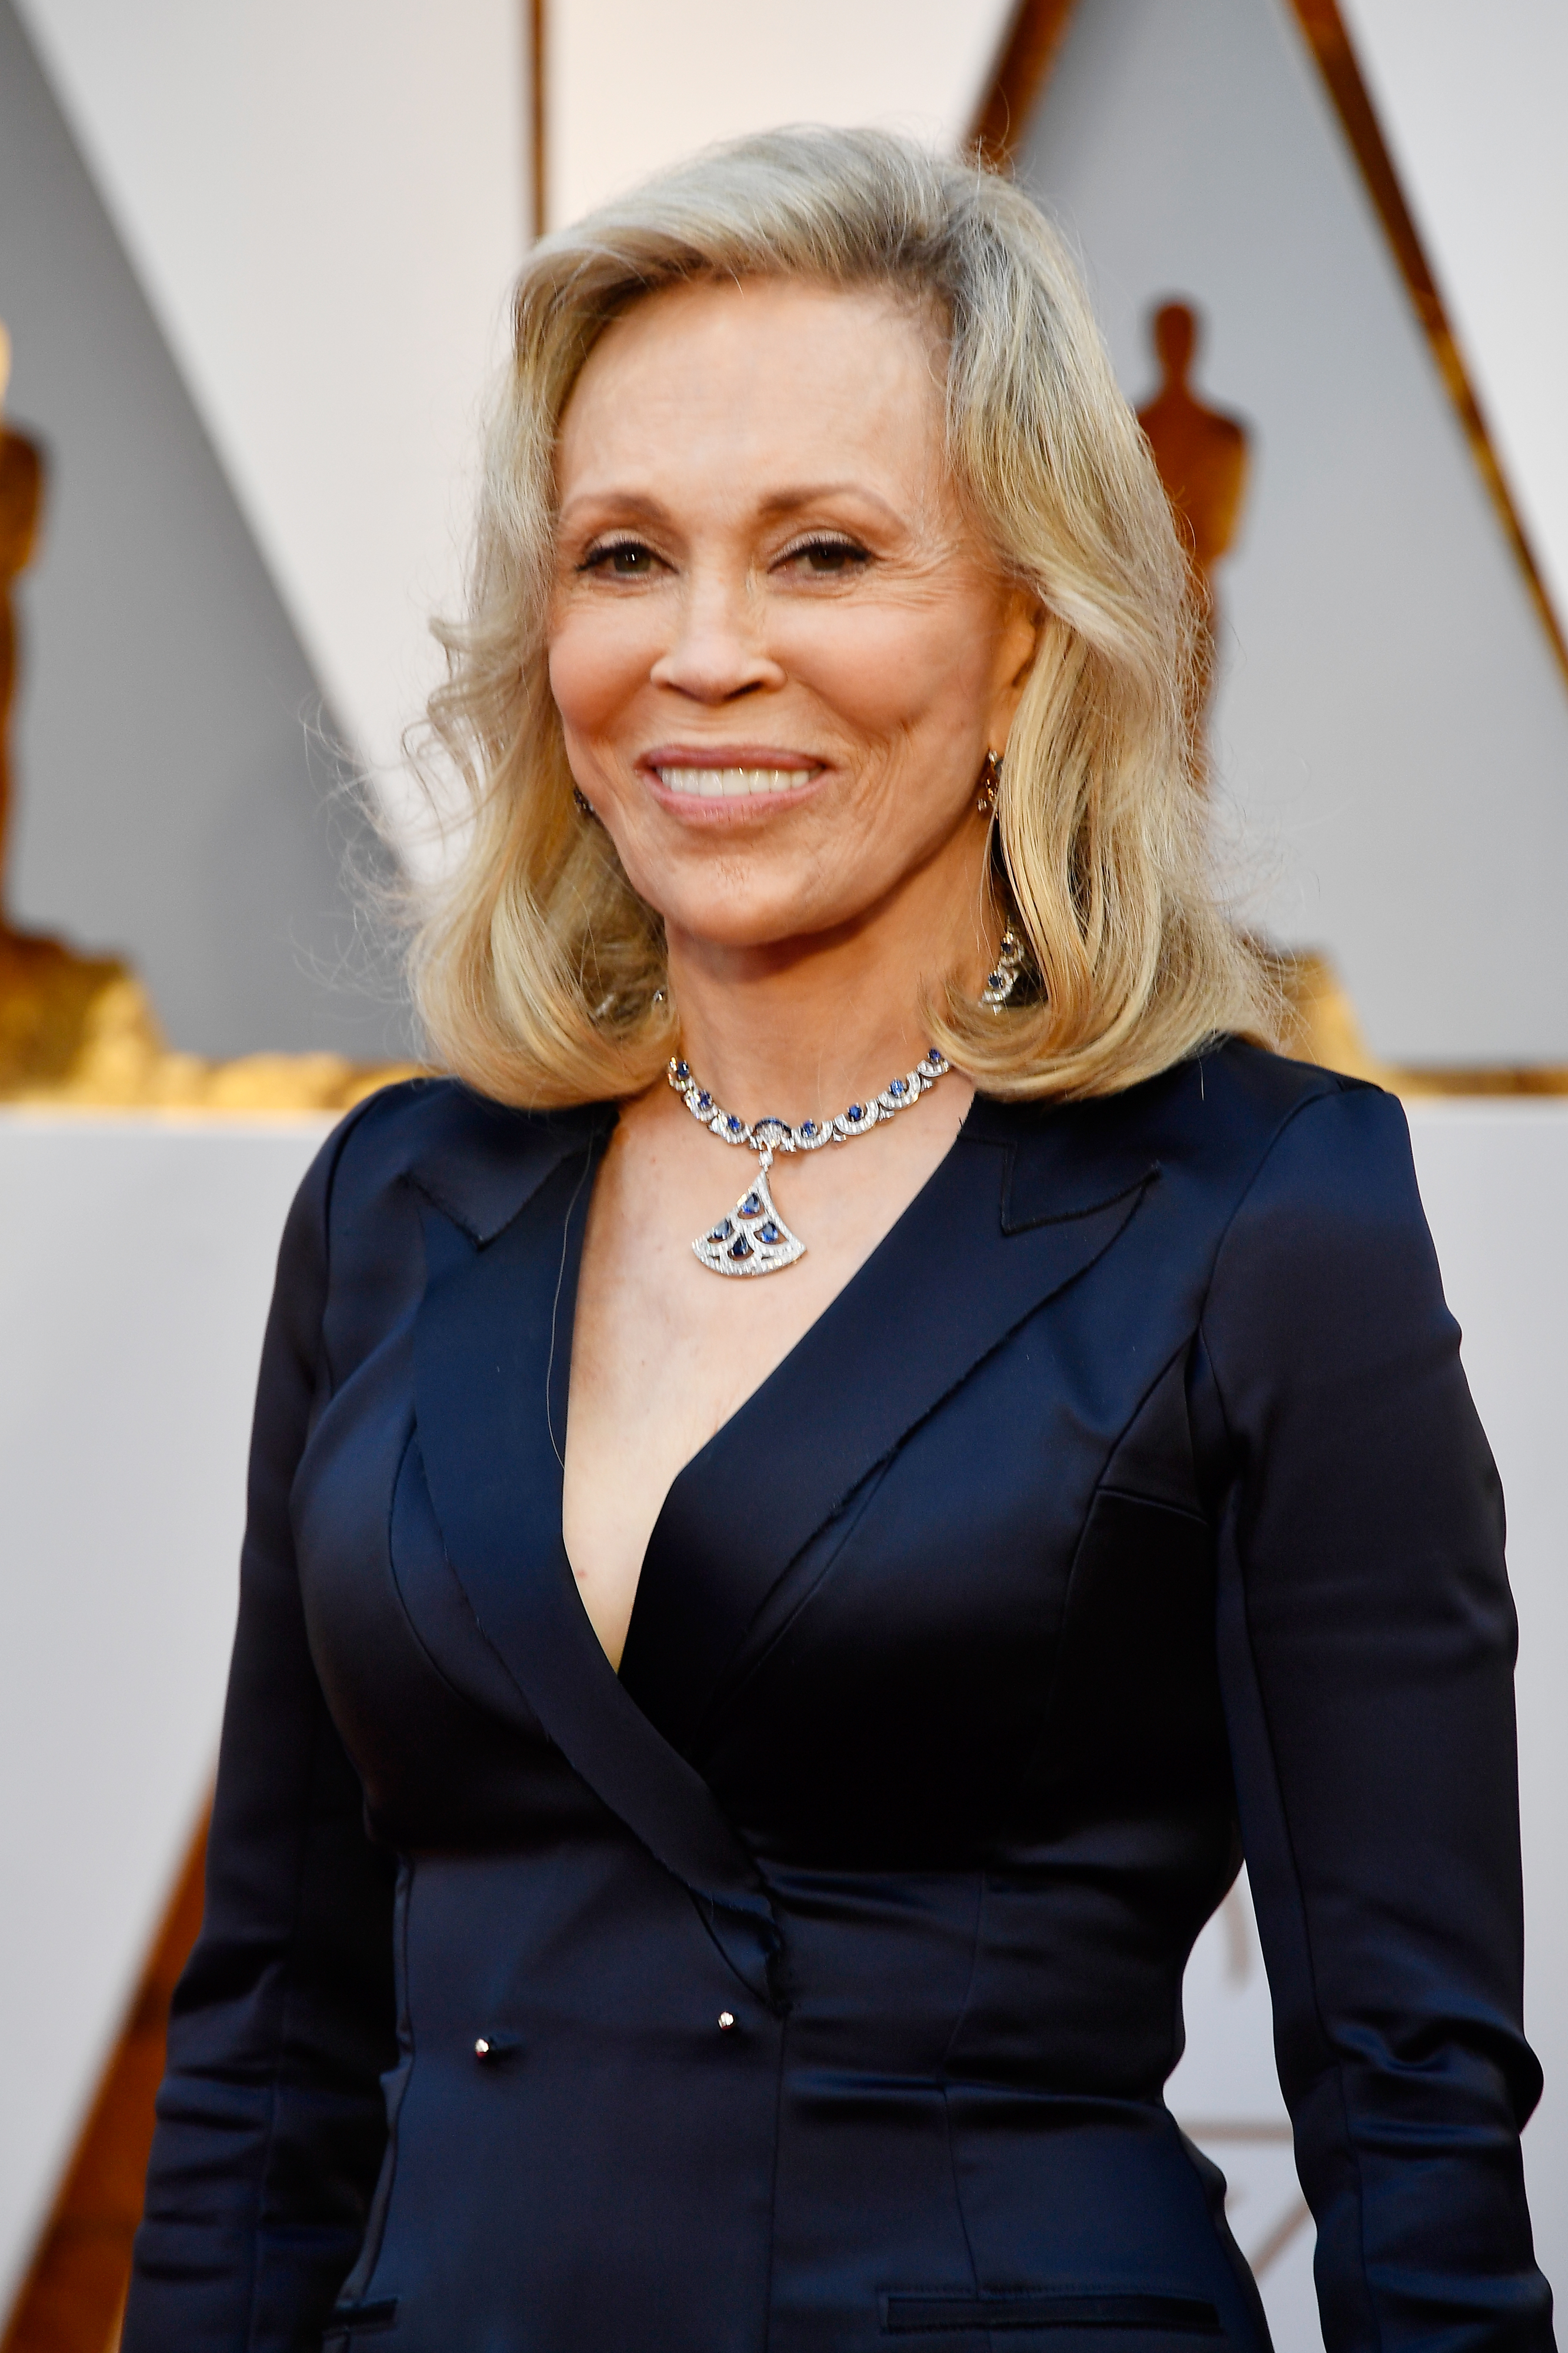 Faye Dunaway at the 89th Annual Academy Awards at Hollywood & Highland Center on February 26, 2017 in Hollywood, California | Source: Getty Images